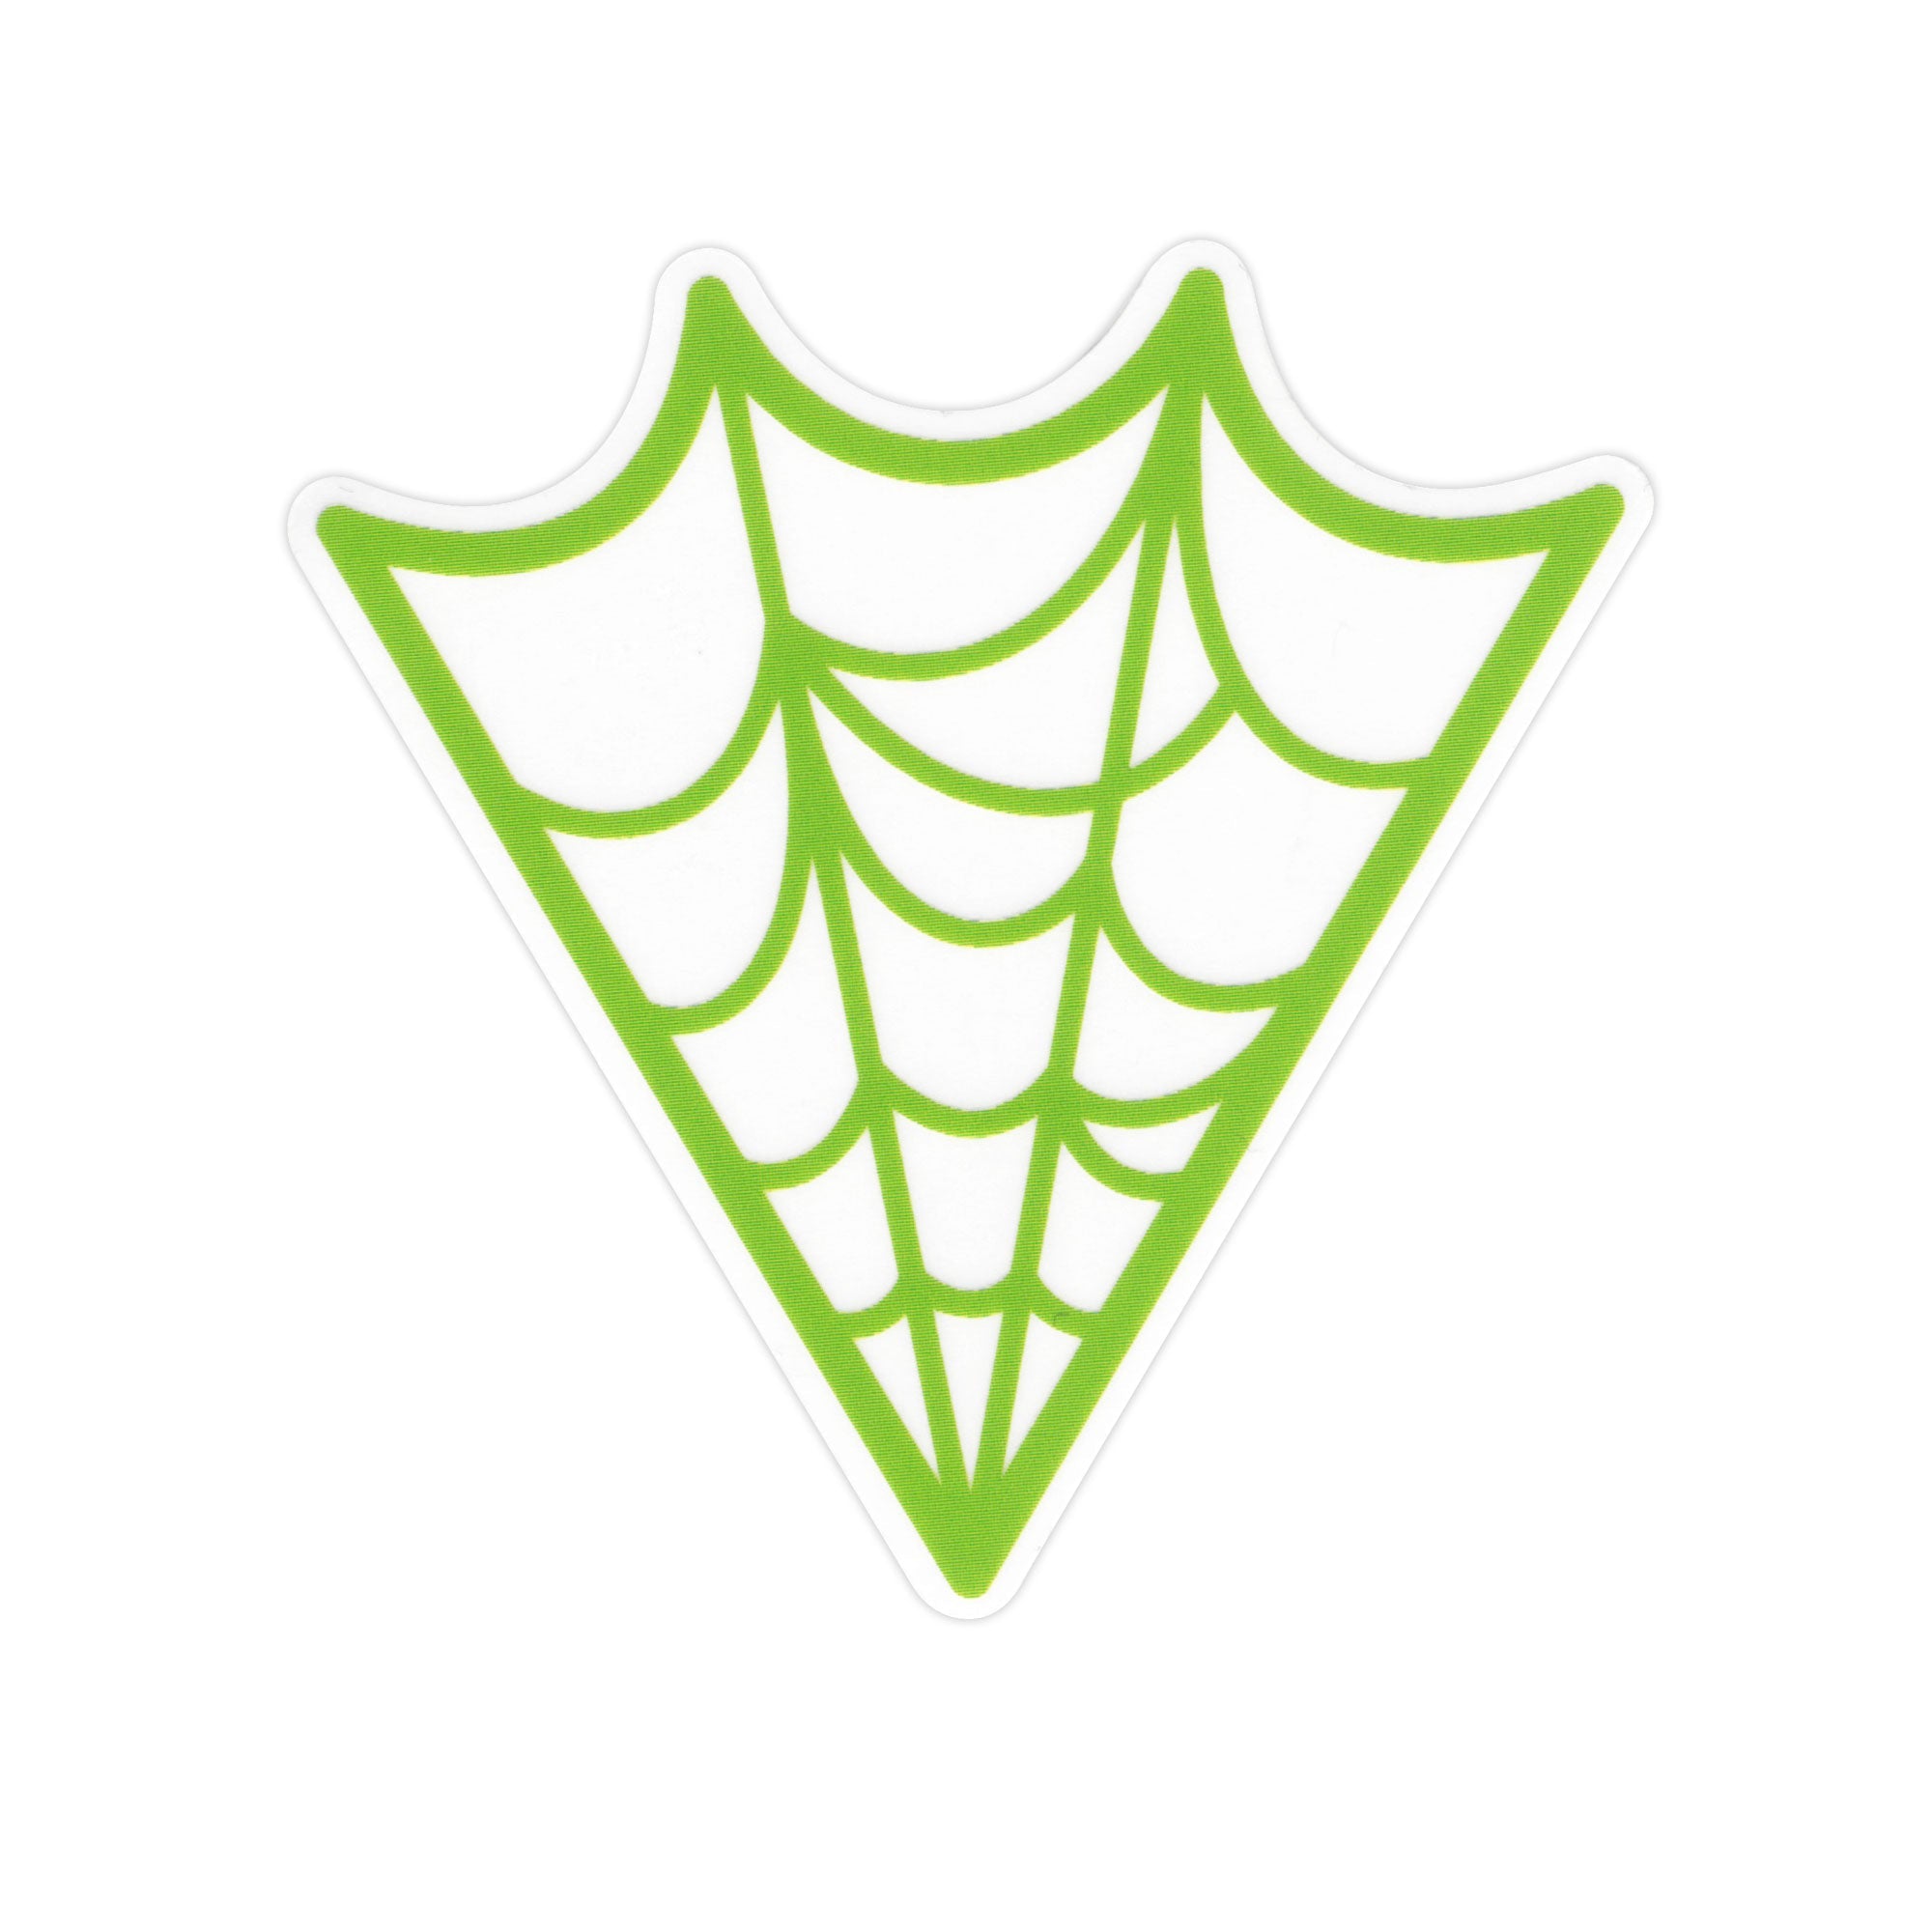 A die cut sticker of a neon green spiderweb on a clear background